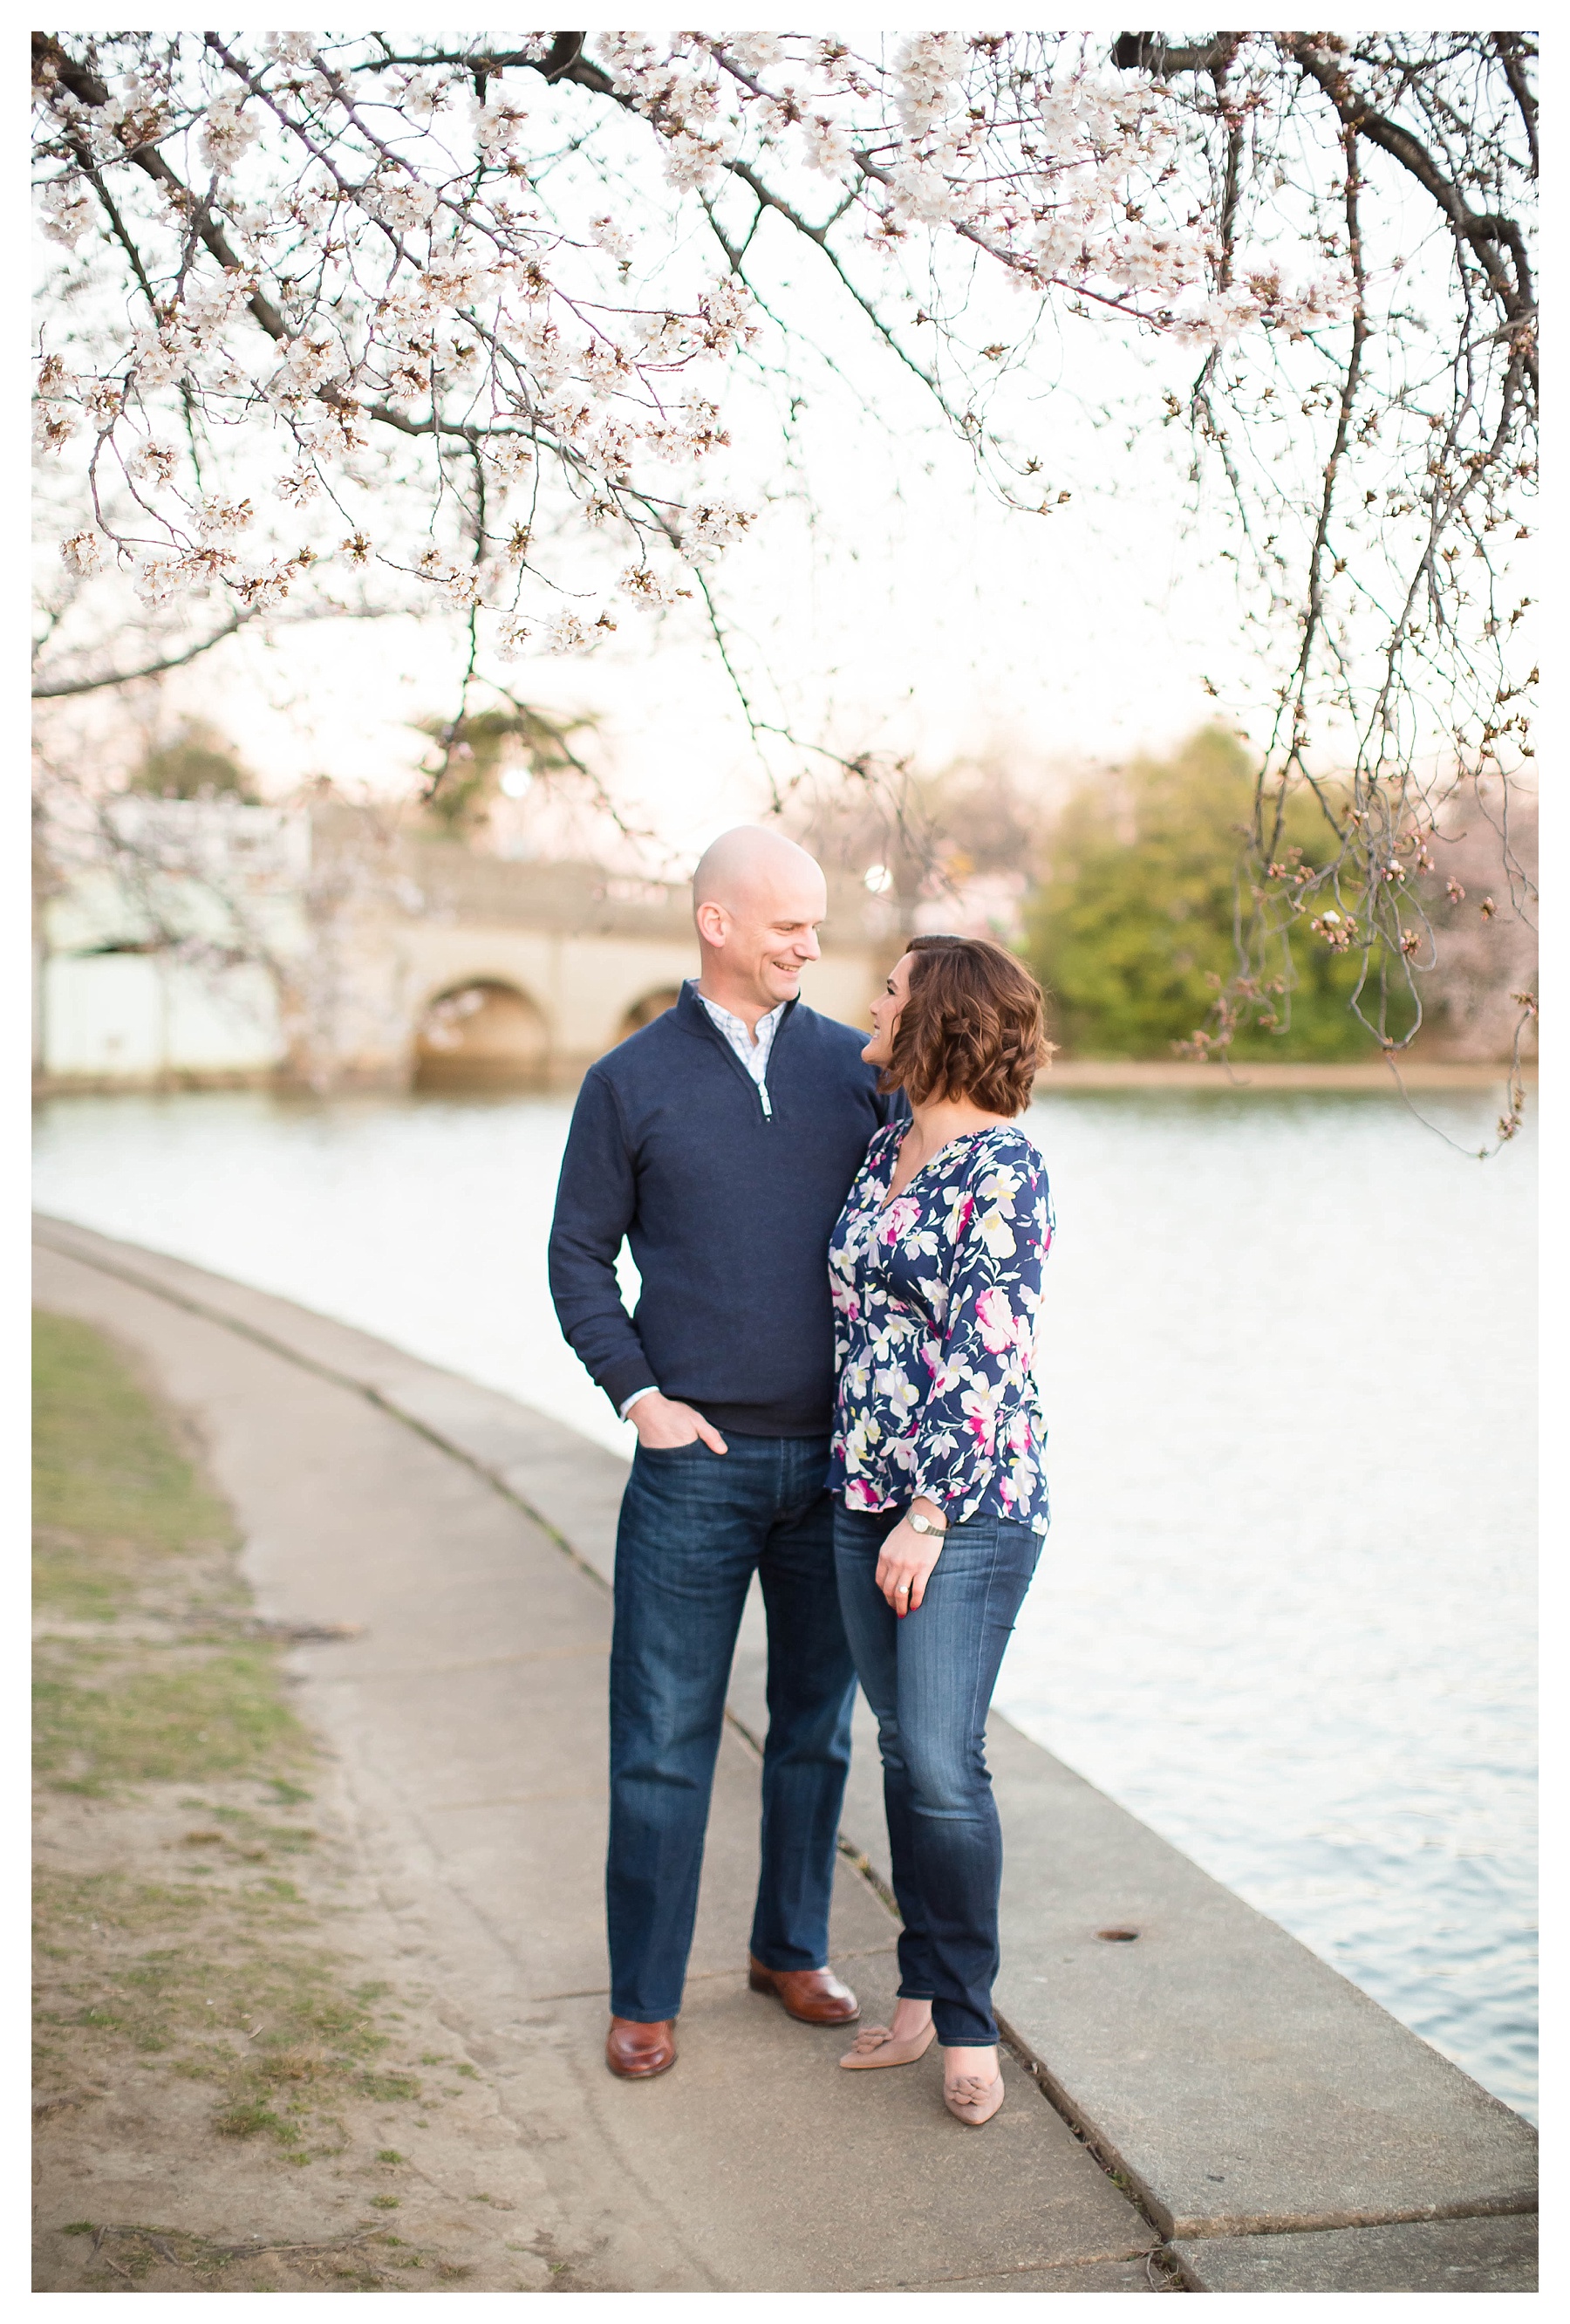 Candice Adelle Photography DC Destination Wedding Photographer Cherry Blossom Engagment Session_0001.jpg